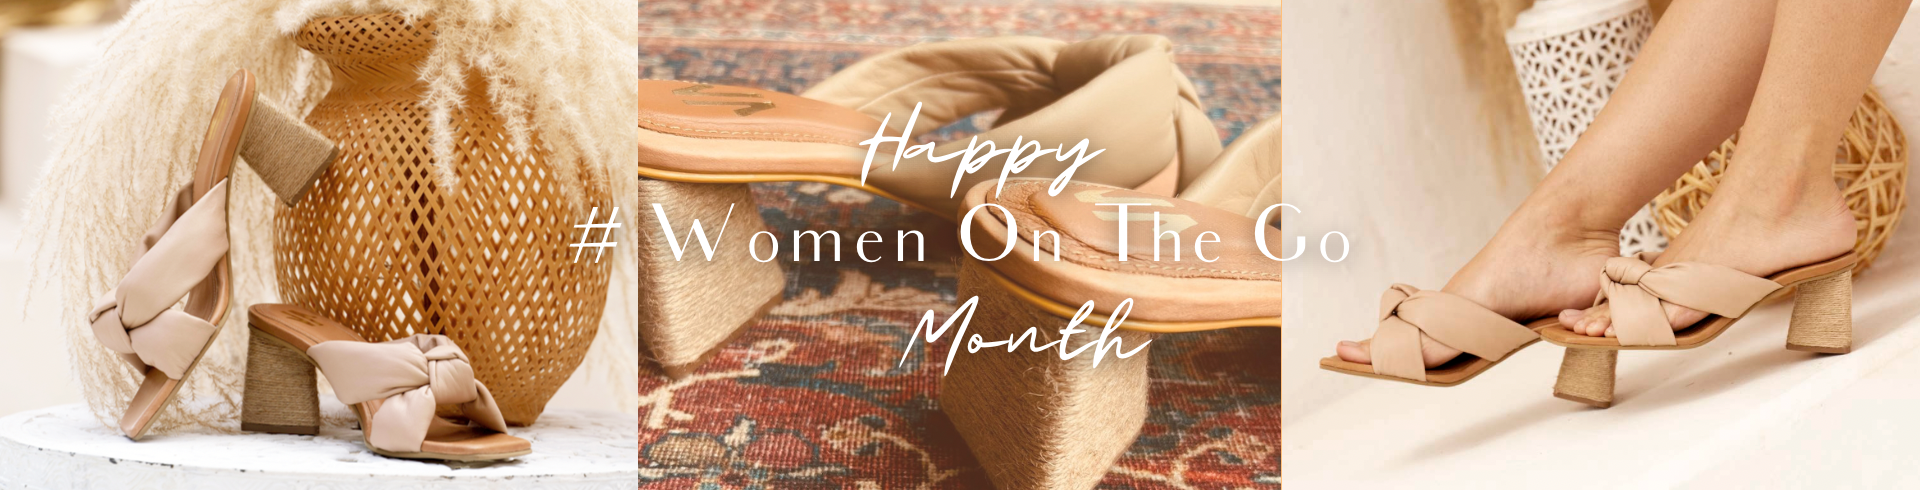 Women On The Go Month